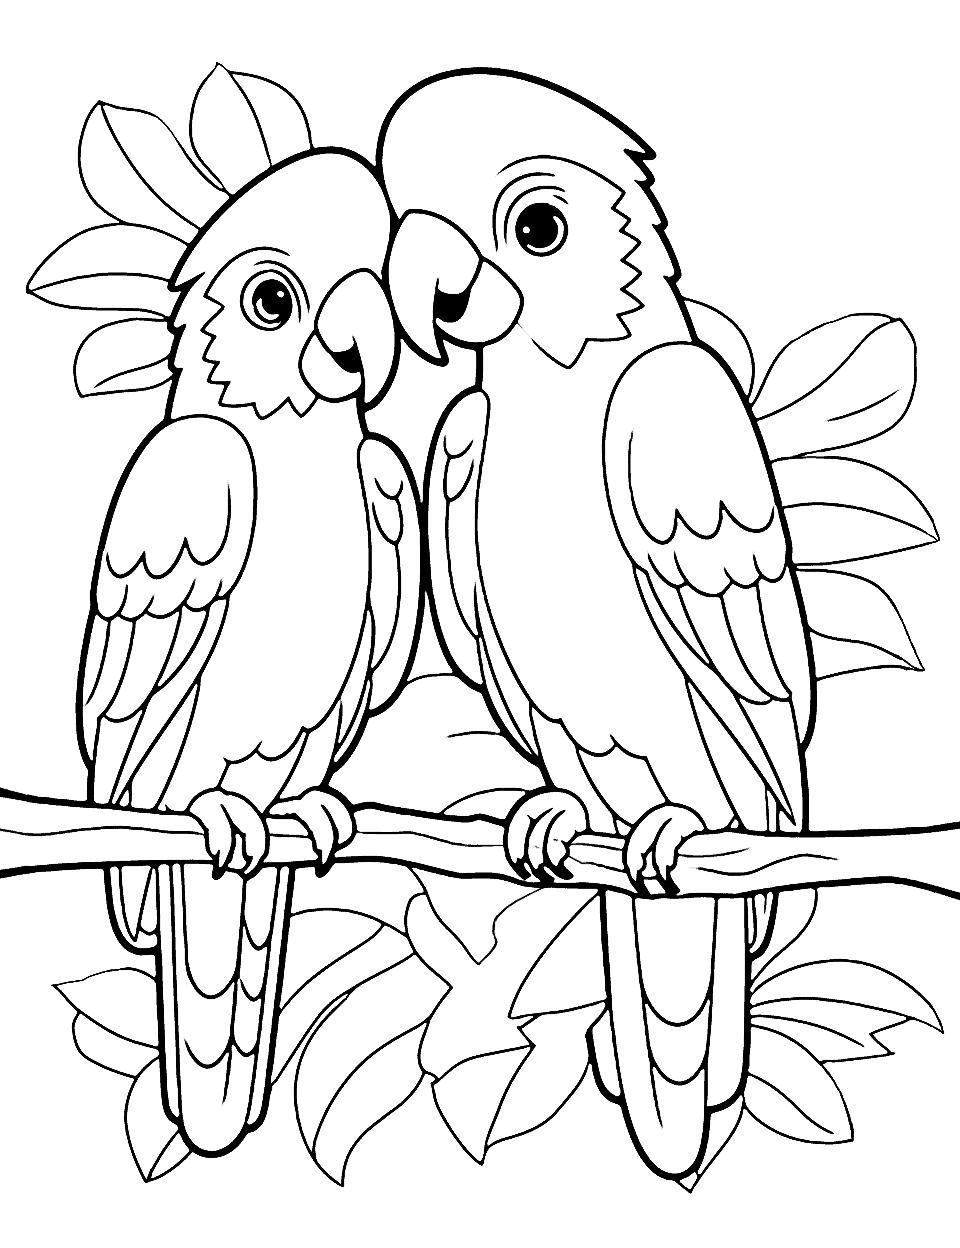 Cute Tropical Parrots Coloring Page - Two vibrant parrots perched on a branch in a tropical setting.